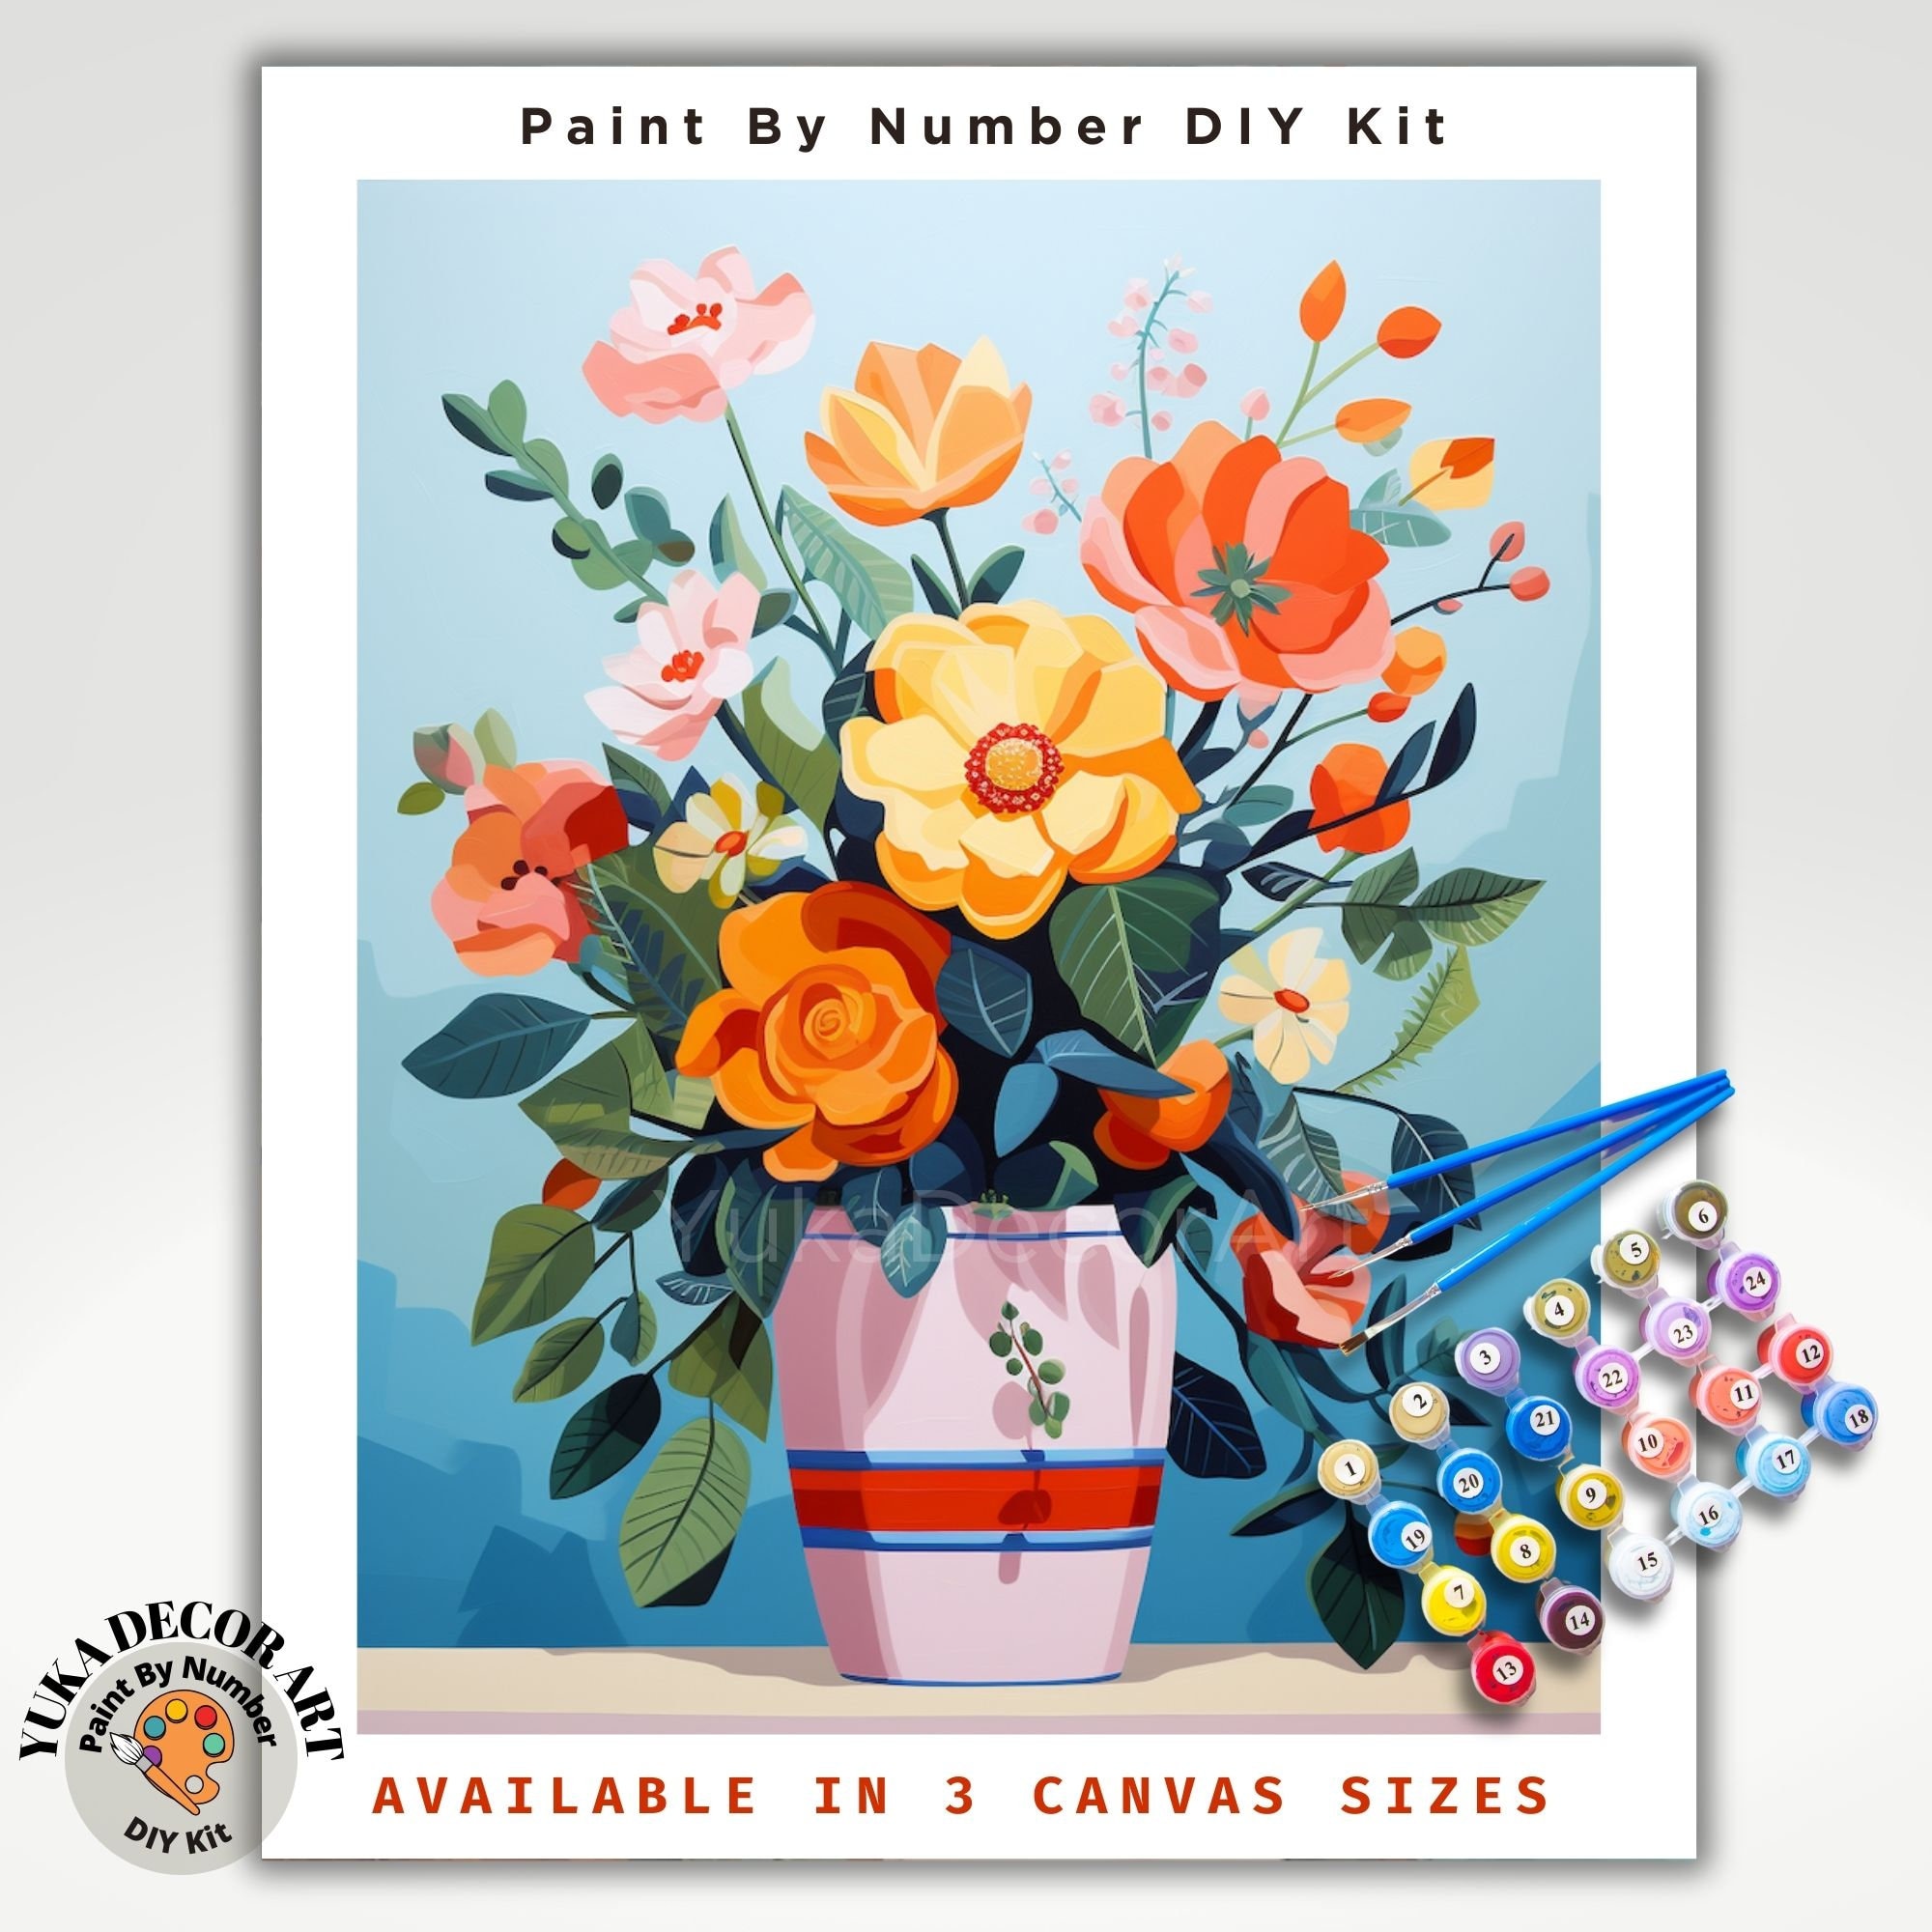 PAINT by NUMBER Kit for Adults Minimalist Flowers Vibrant Art Easy  Beginners Colorful Paint DIY Kit Anniversary Mom Gift Teenager Room Decor 